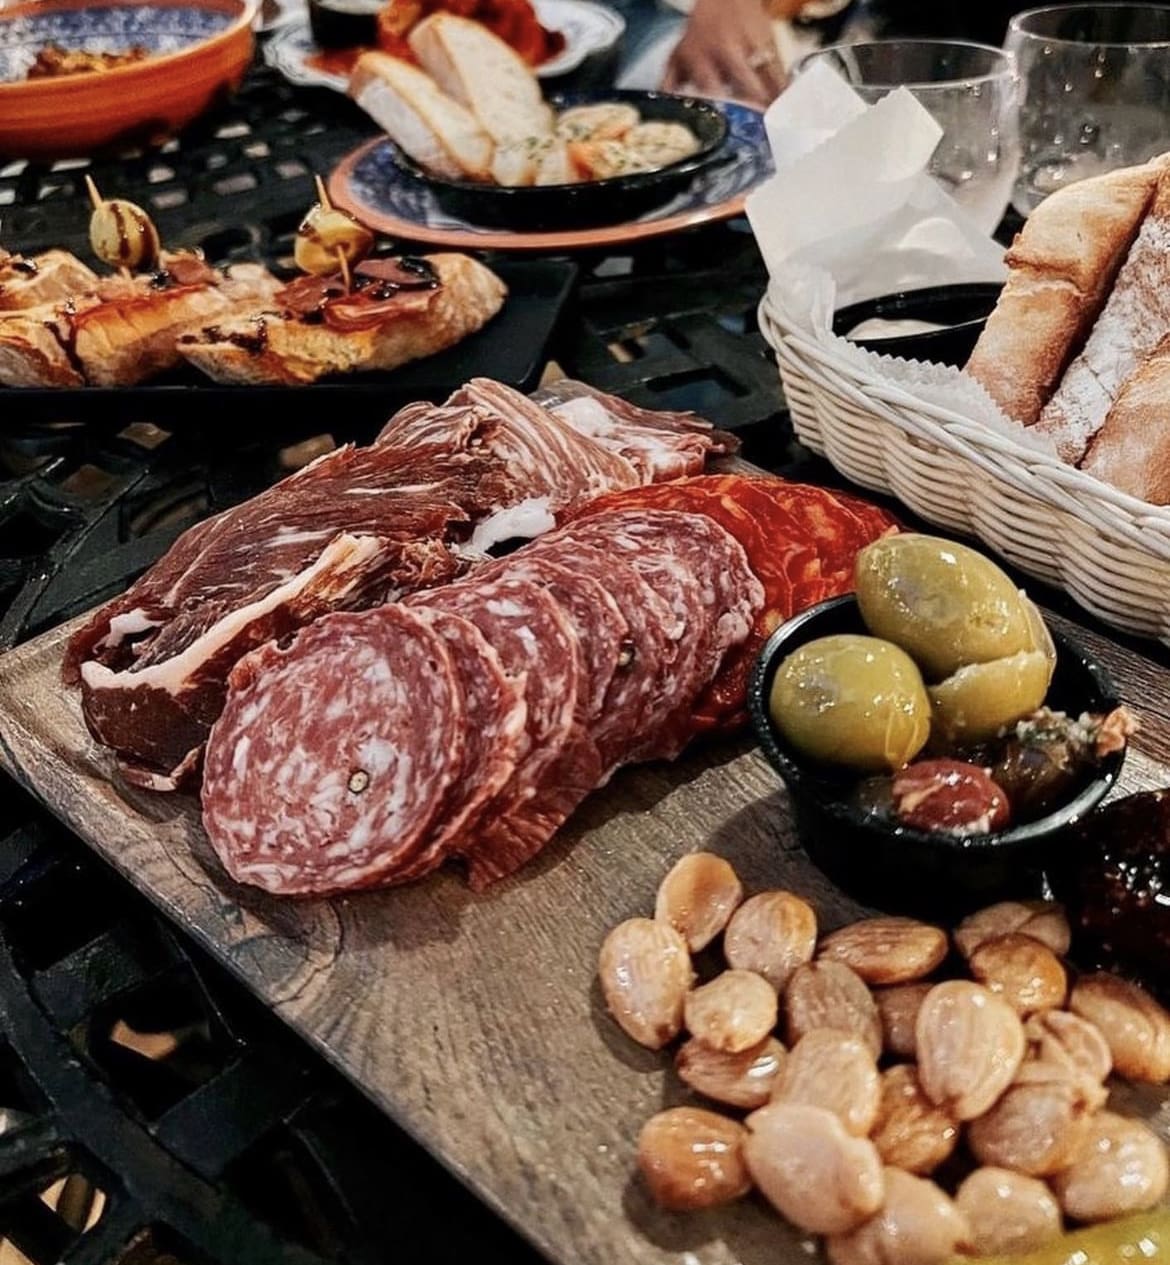 Spanish Tapas in Madrid - the best ways to experience culture in Europe